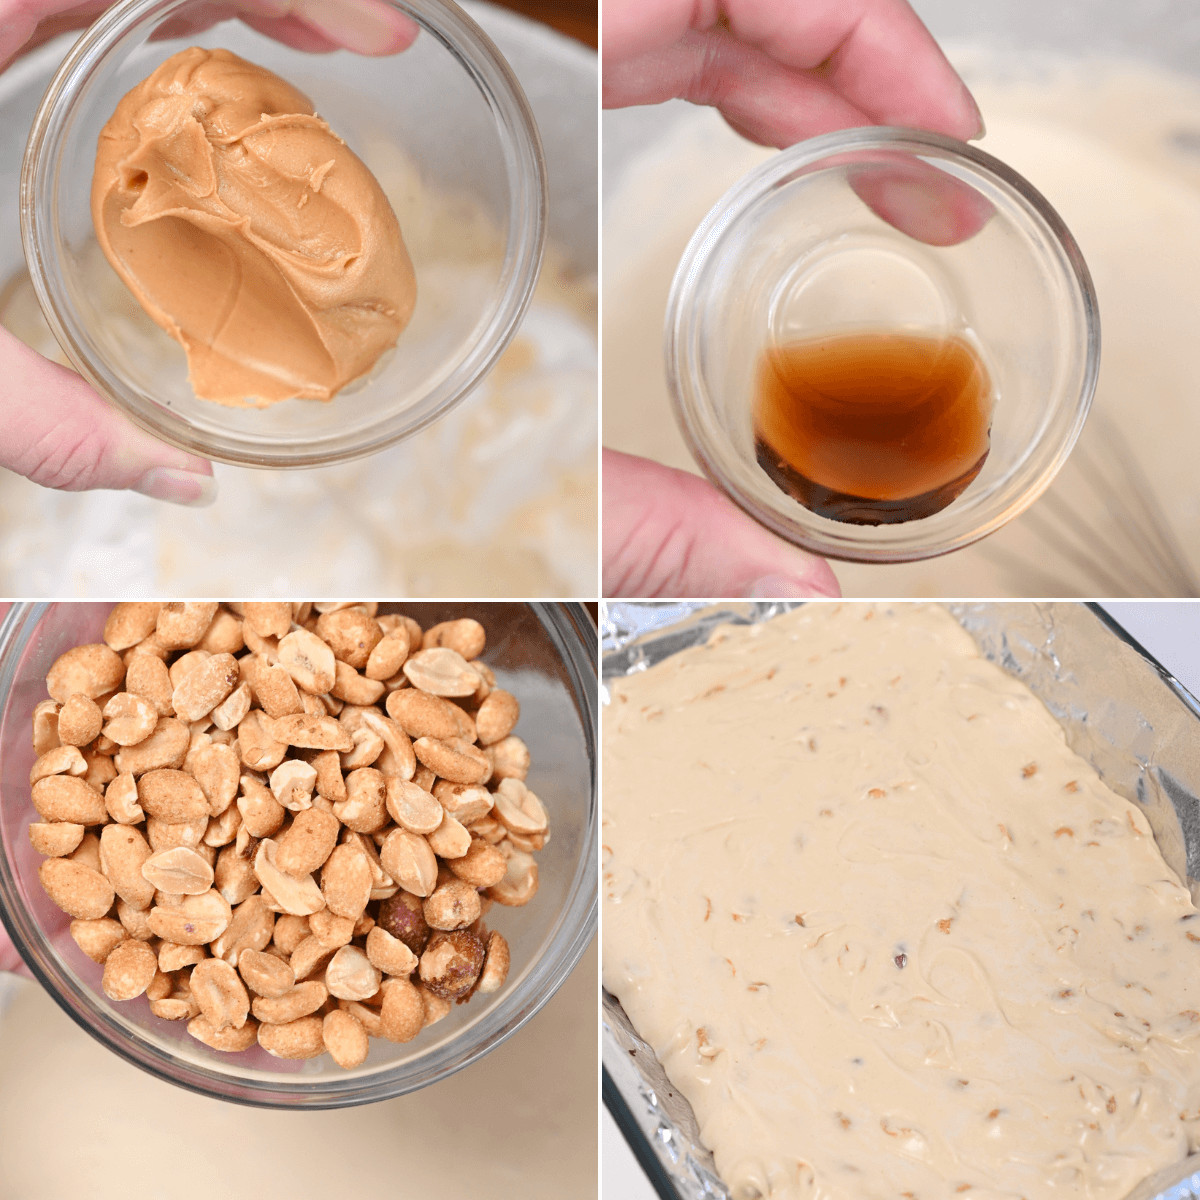 Making the caramel and nougat layer.